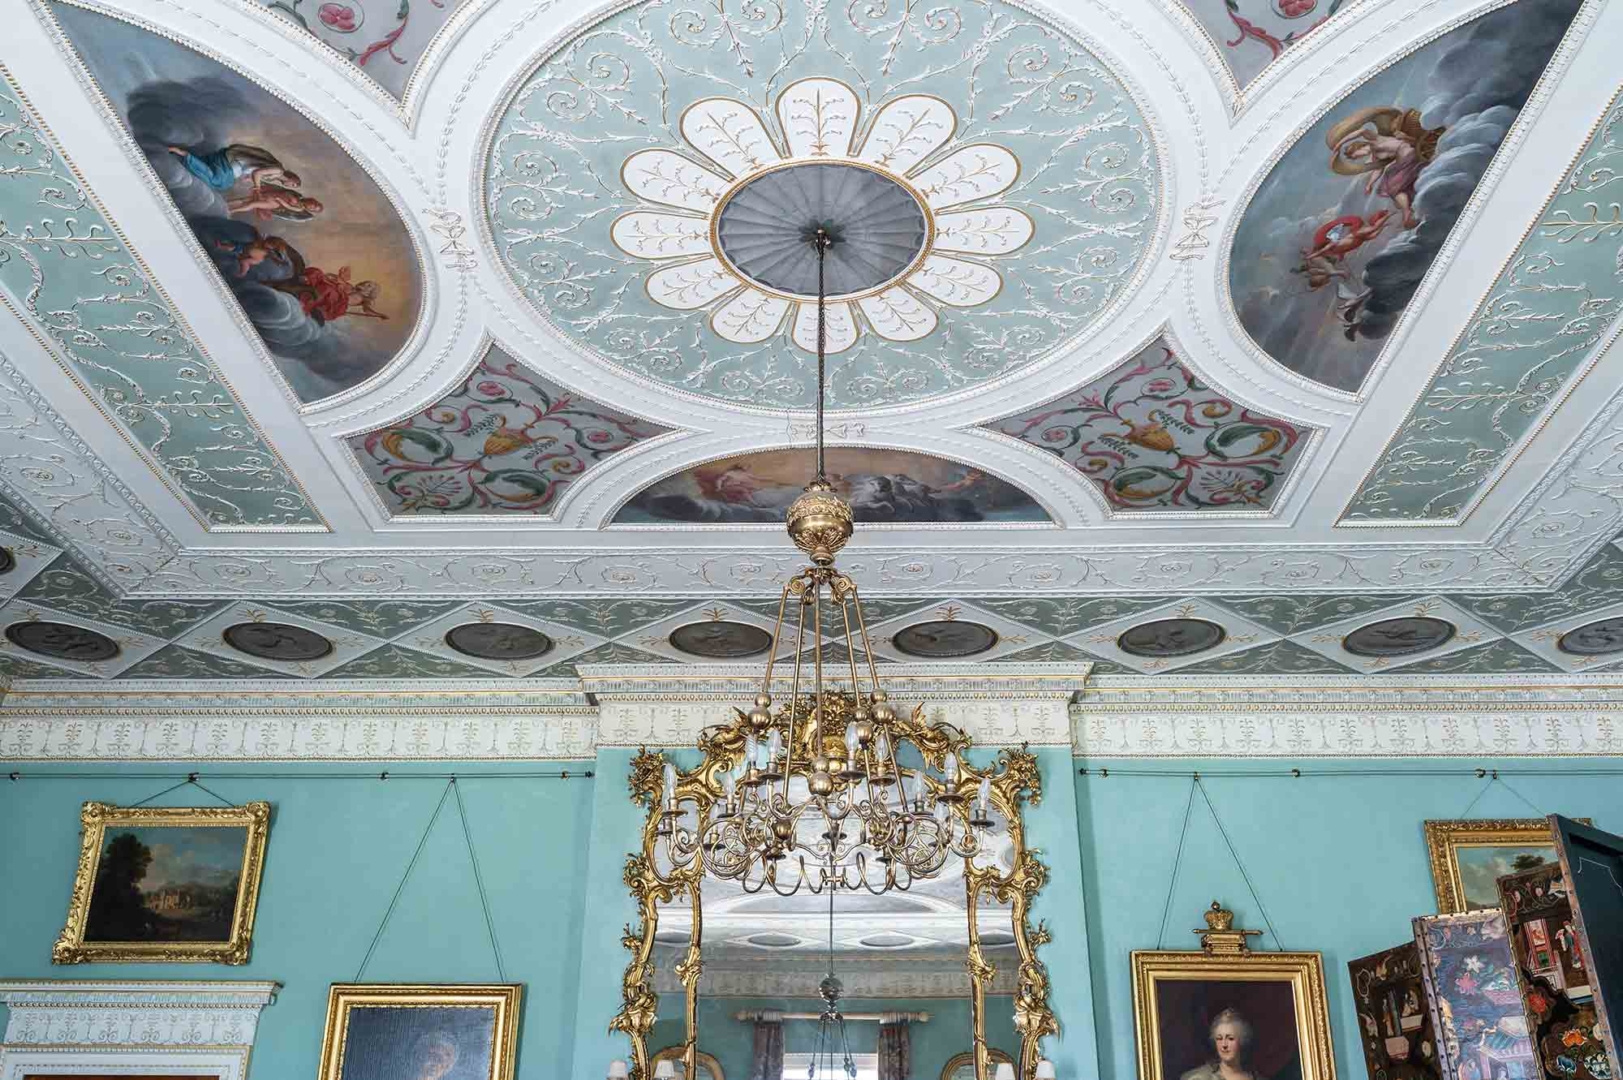 Visit Curraghmore House to learn more about the exquisite craftsmanship of thie Gregorian Castle in Waterford County